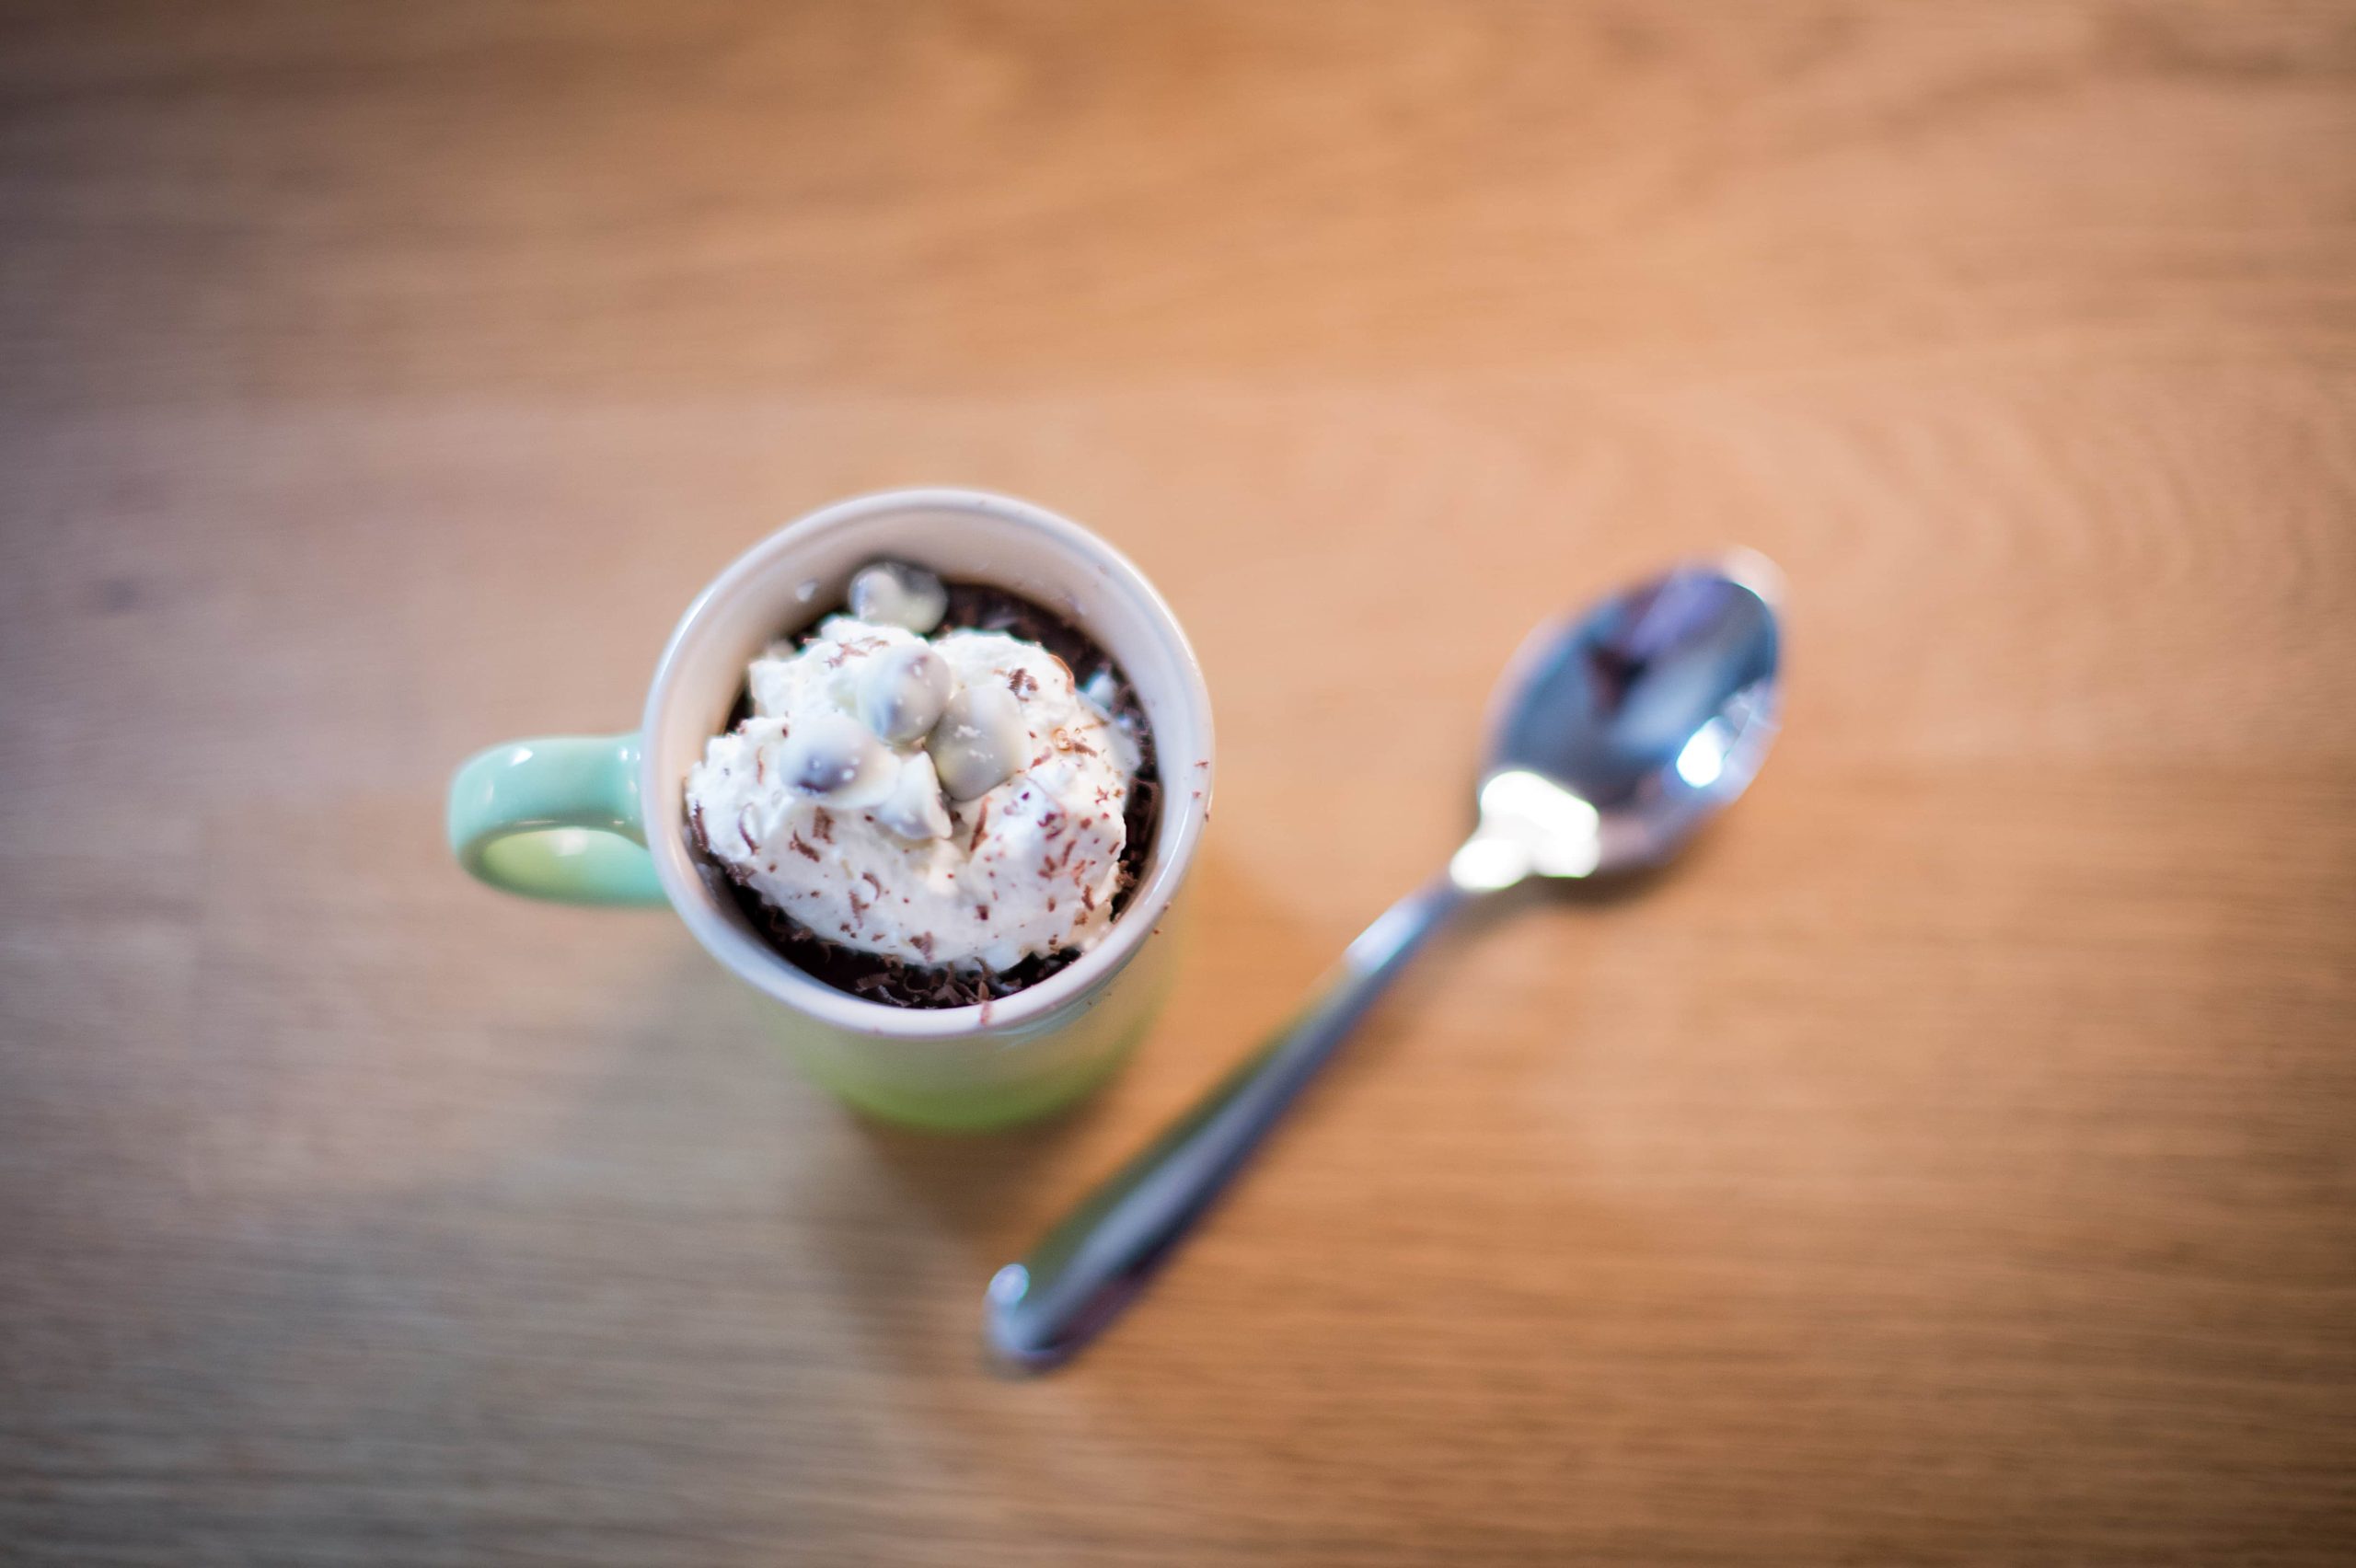 A Coffee and Chocolate dessert with a spoon